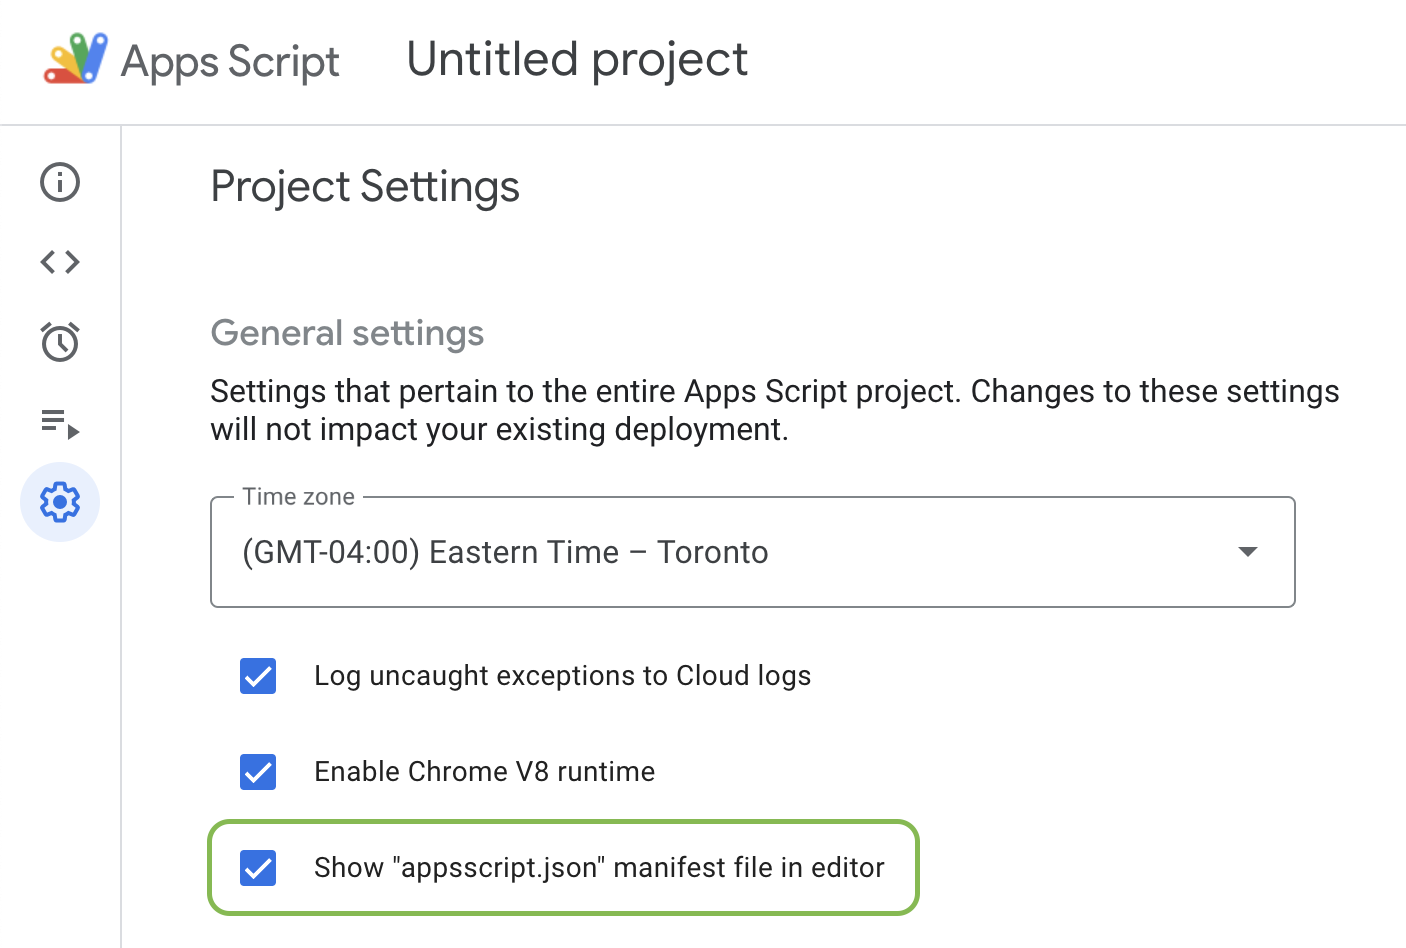 Enable access to appsscript.json manifest file in the project settings